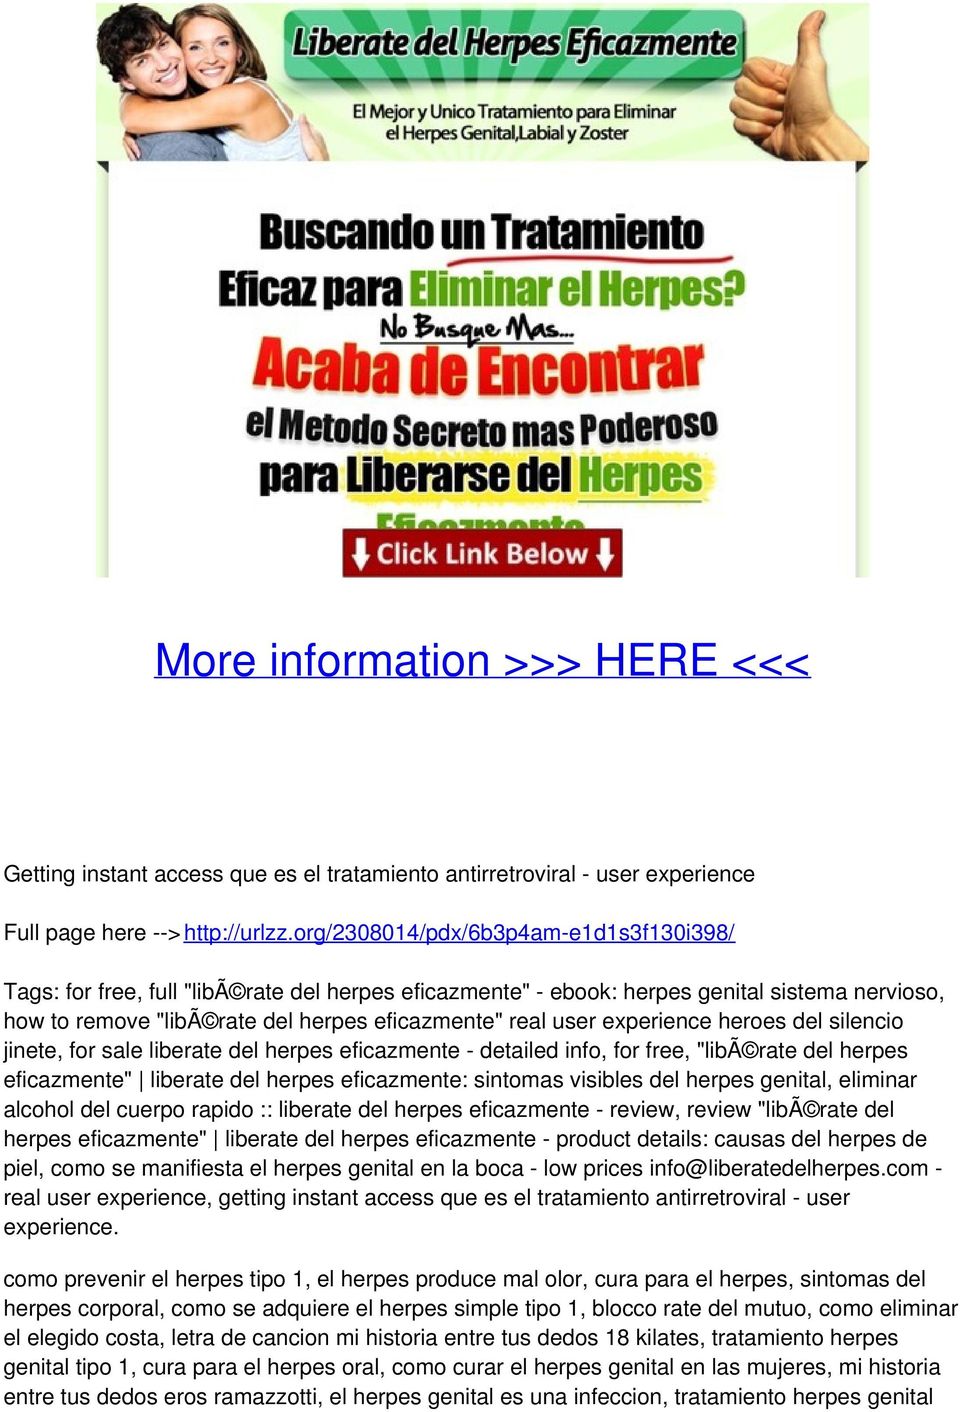 experience heroes del silencio jinete, for sale liberate del herpes eficazmente - detailed info, for free, "libã rate del herpes eficazmente" liberate del herpes eficazmente: sintomas visibles del